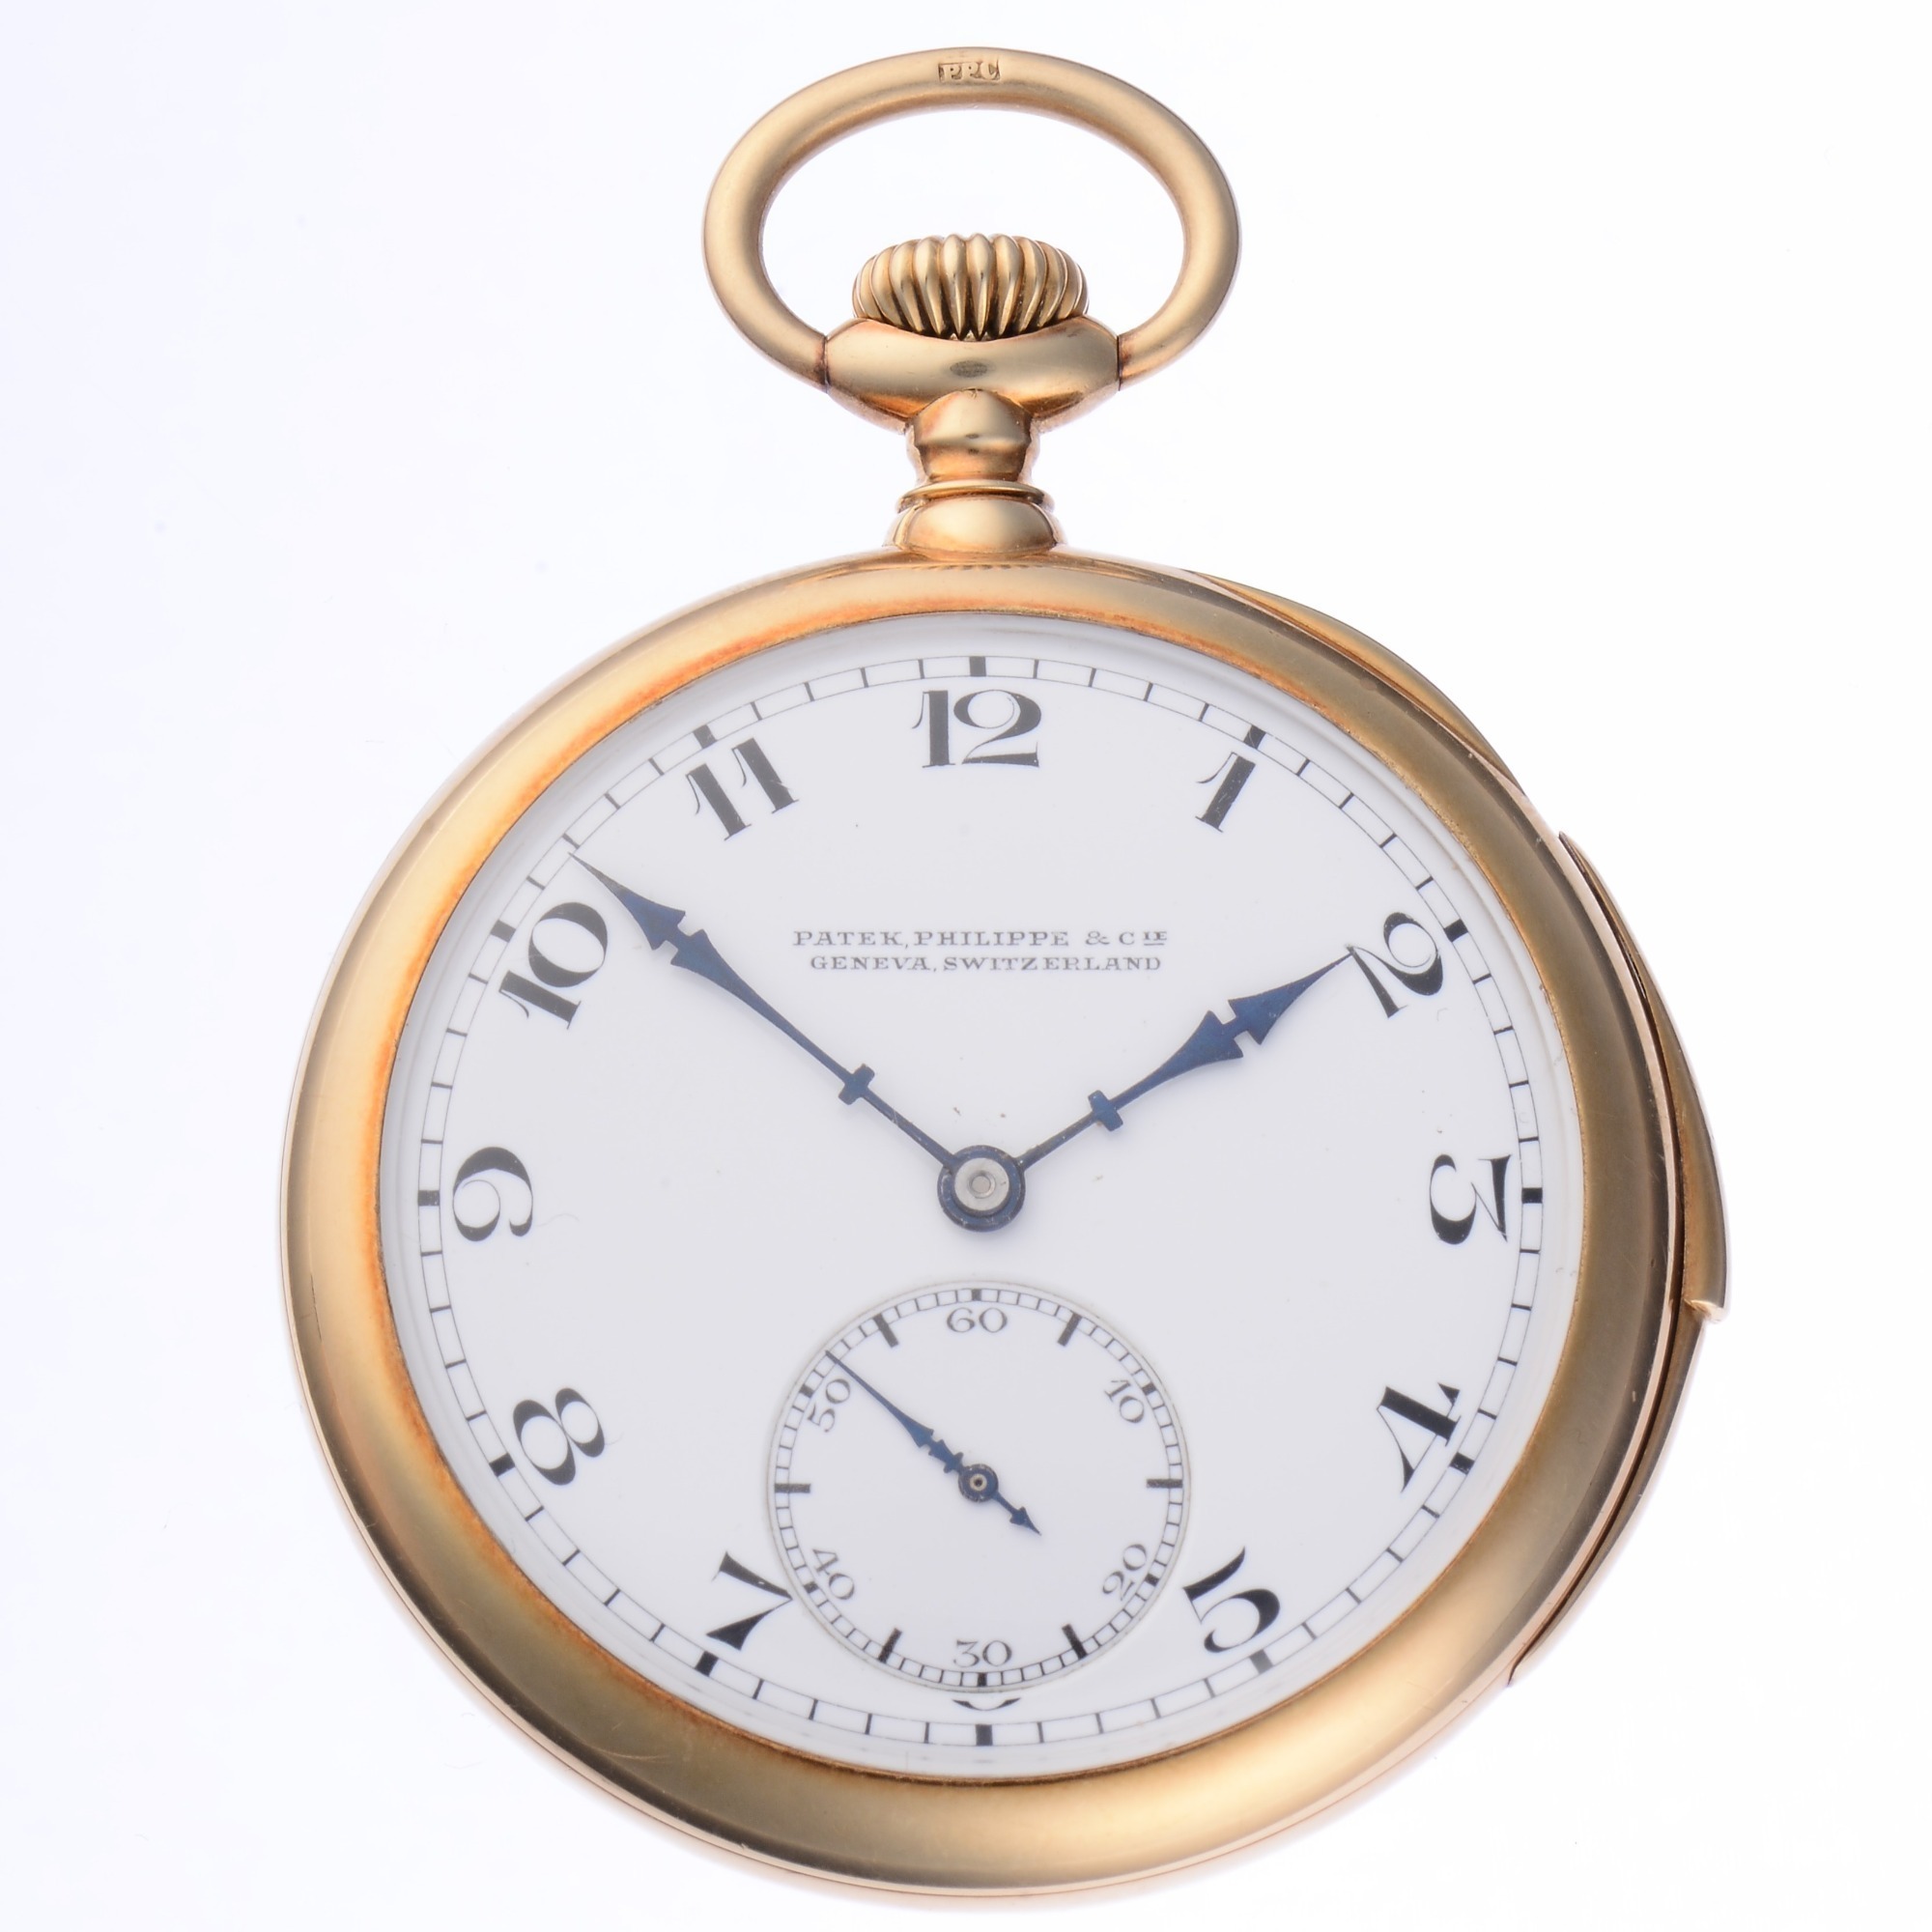 Patek Philippe Minute Repeater 18K Gold Pocket Watch Retailed by Spaulding and Company